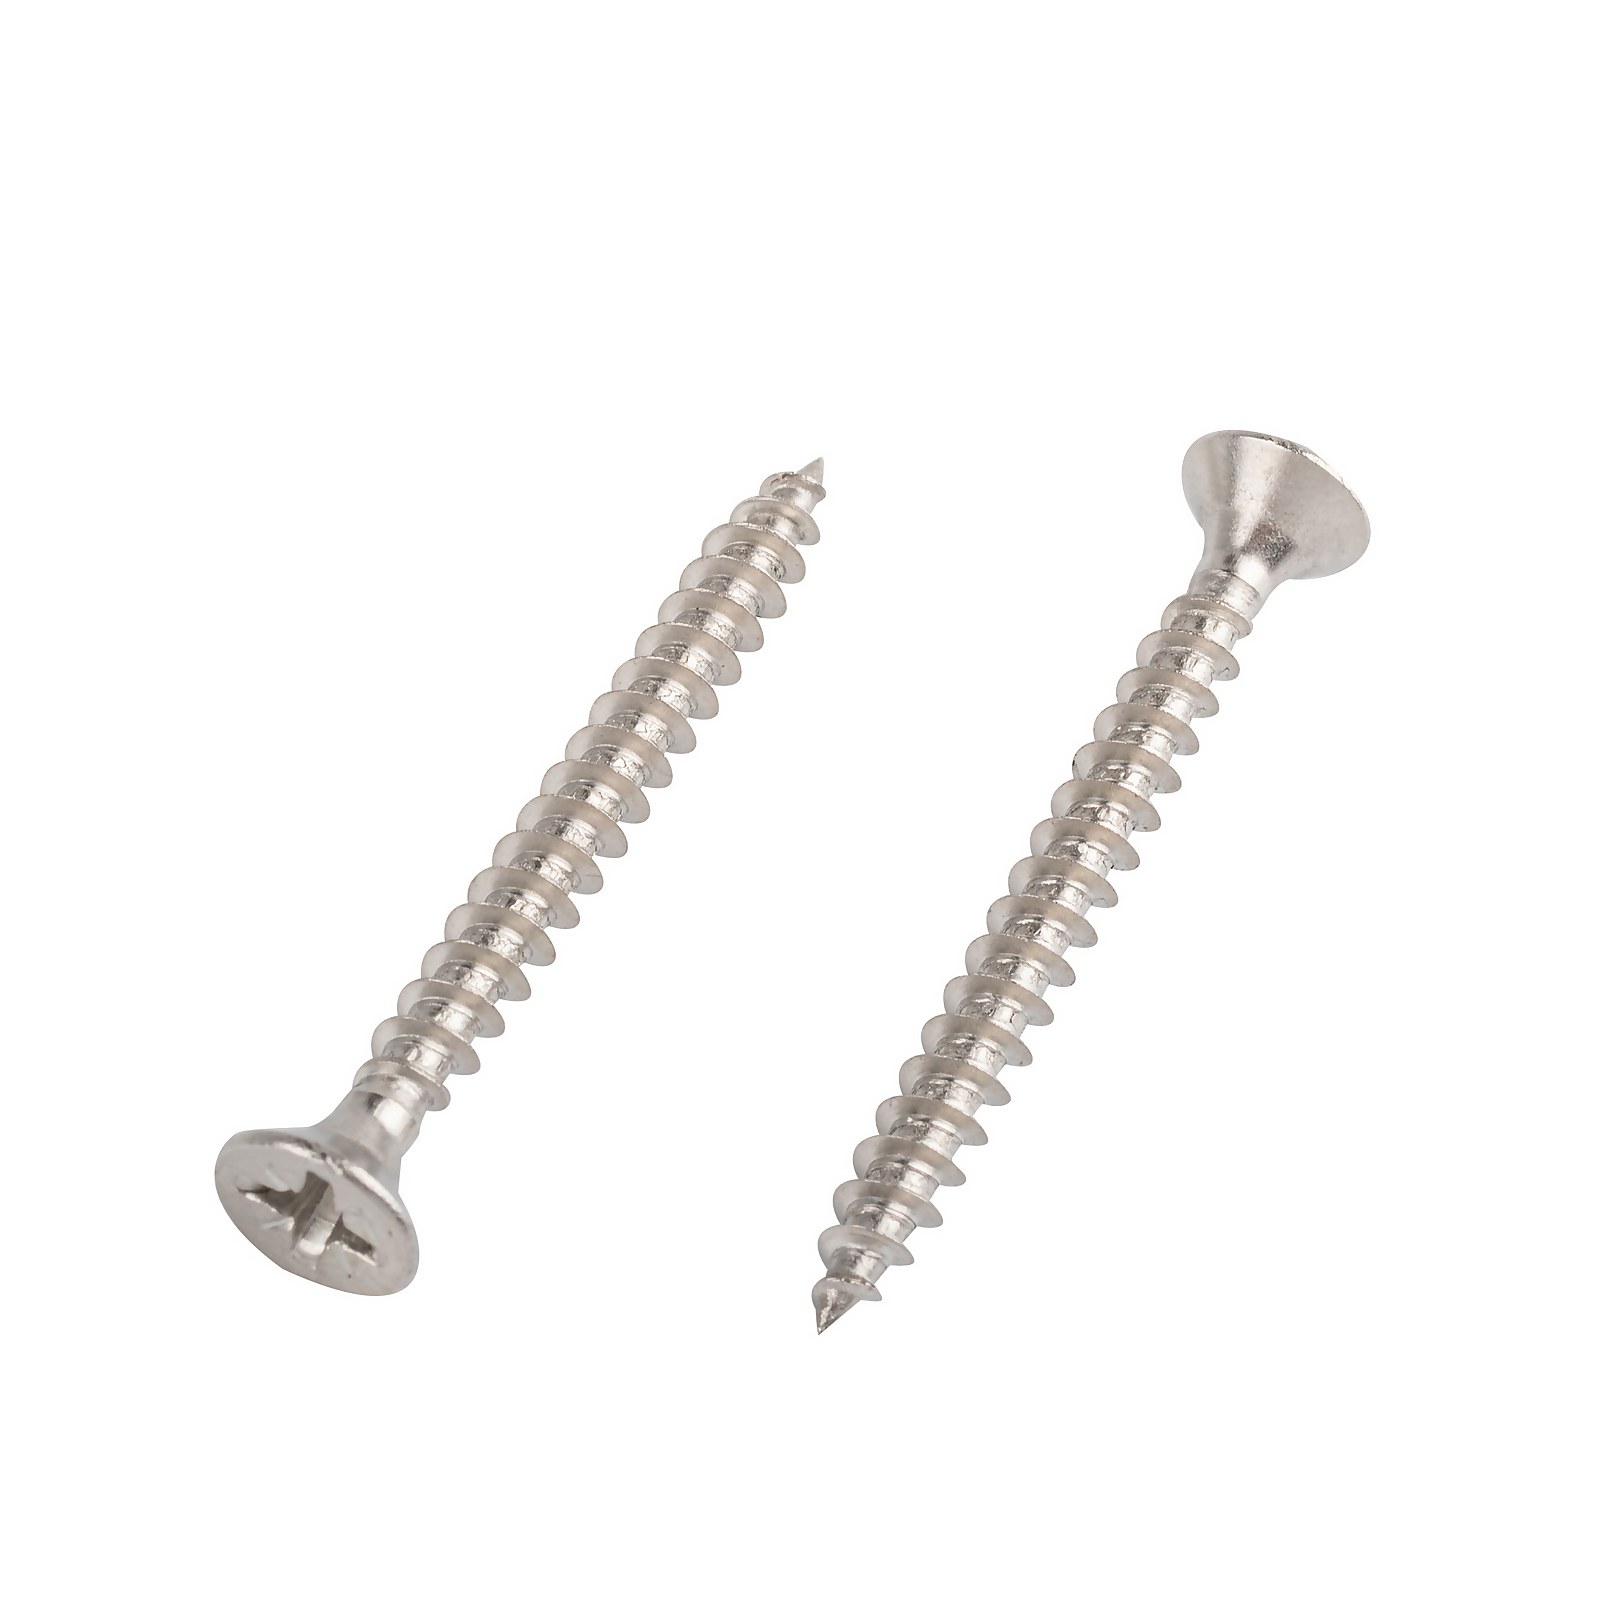 Photo of Homebase Stainless Steel Single Thread Screw 4 X 40mm 100 Pack